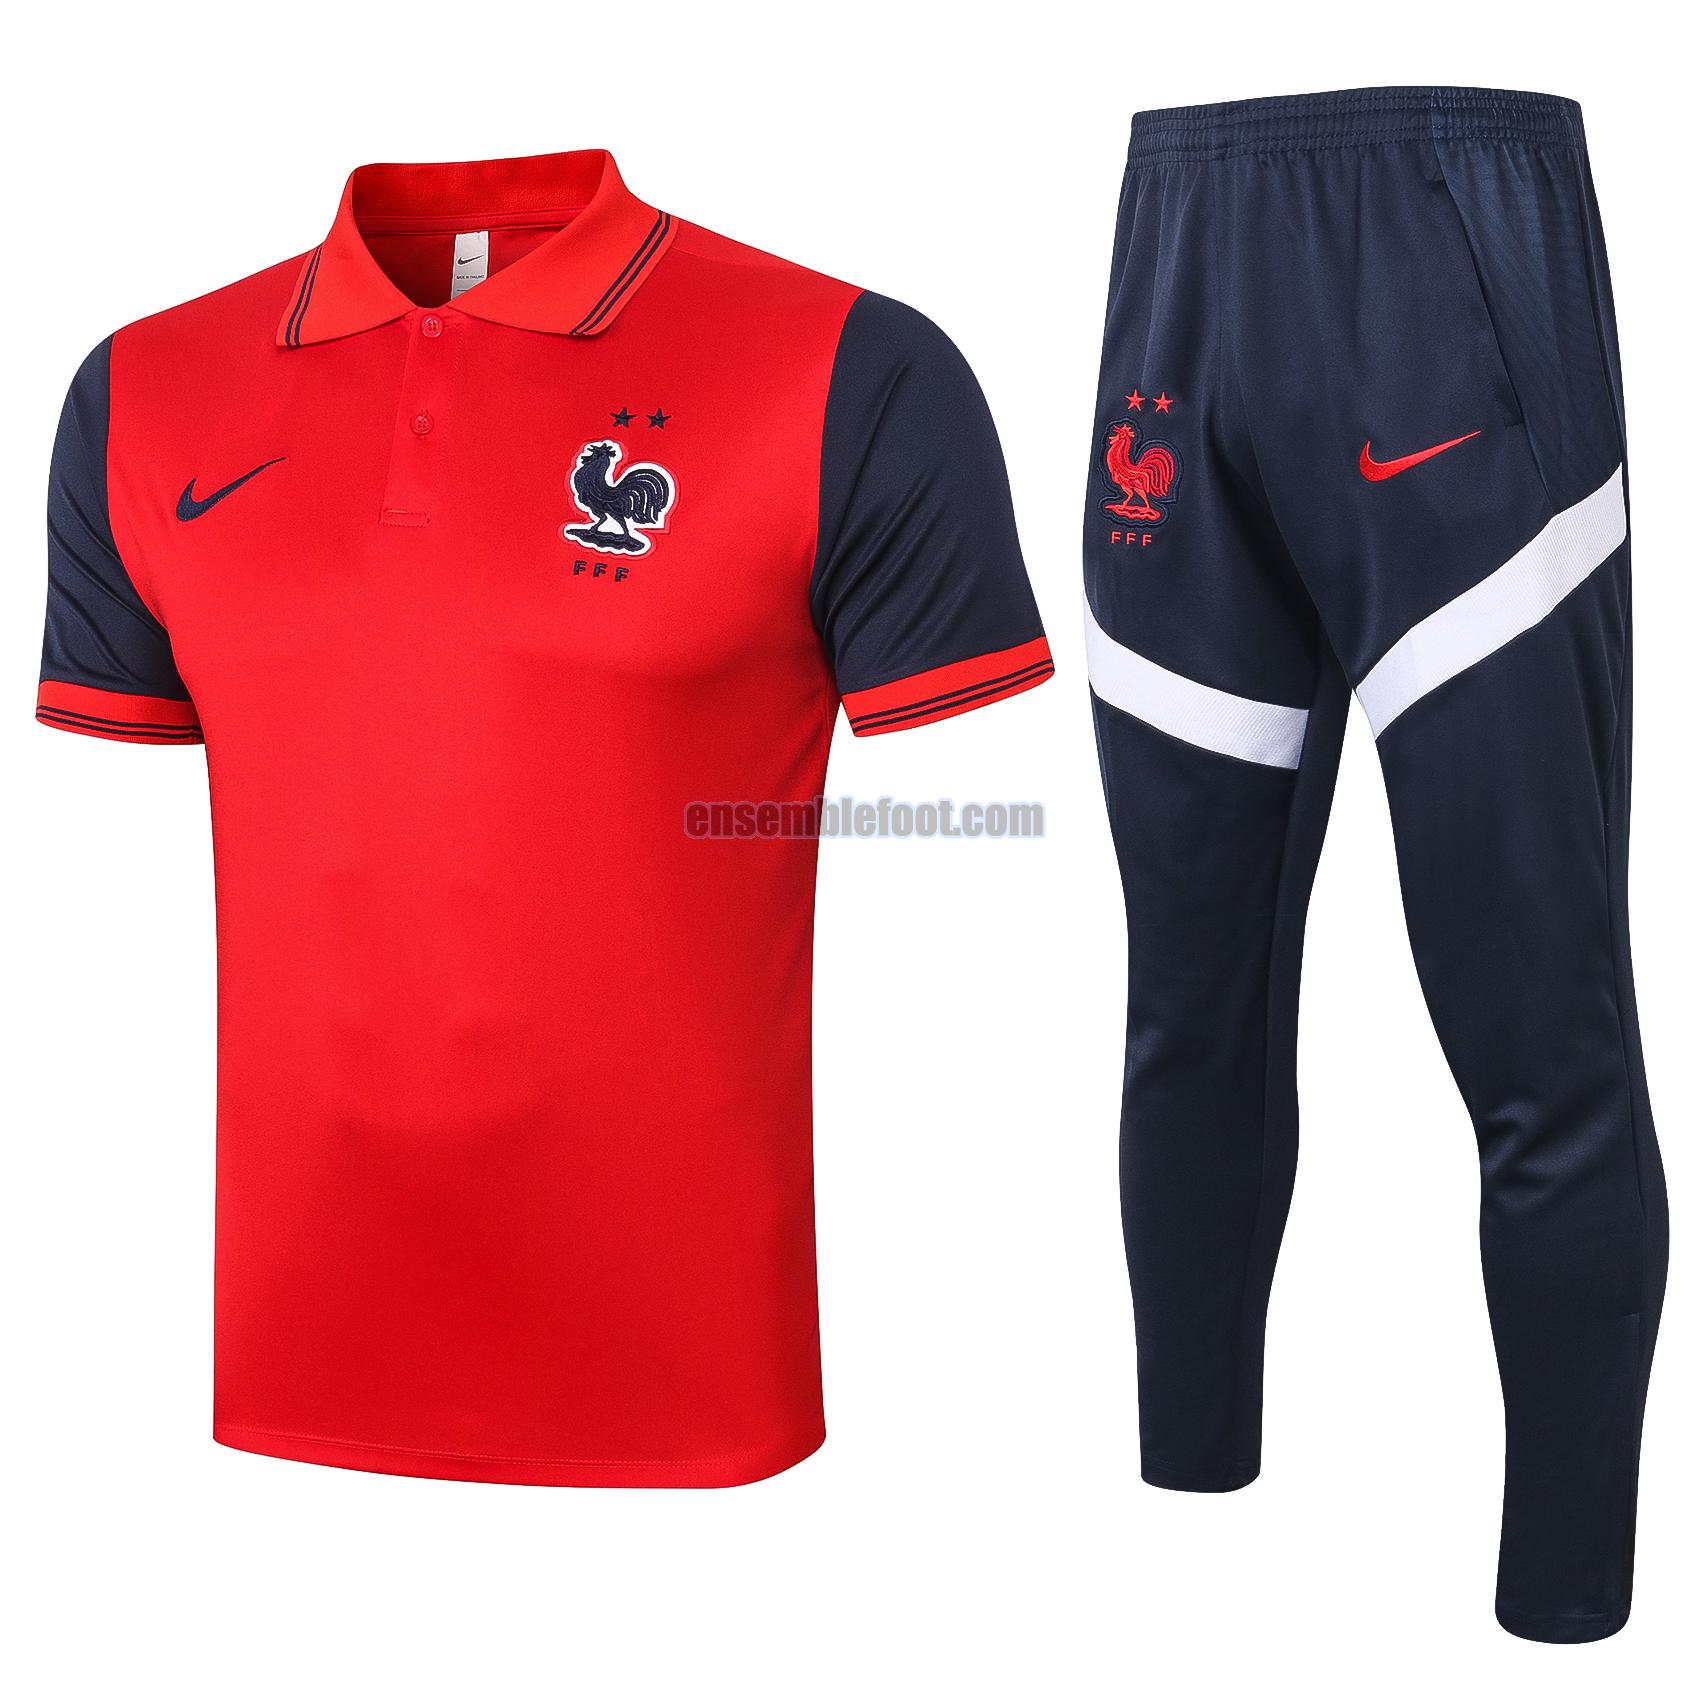 maillots de foot polo france 2020-2021 rouge costume